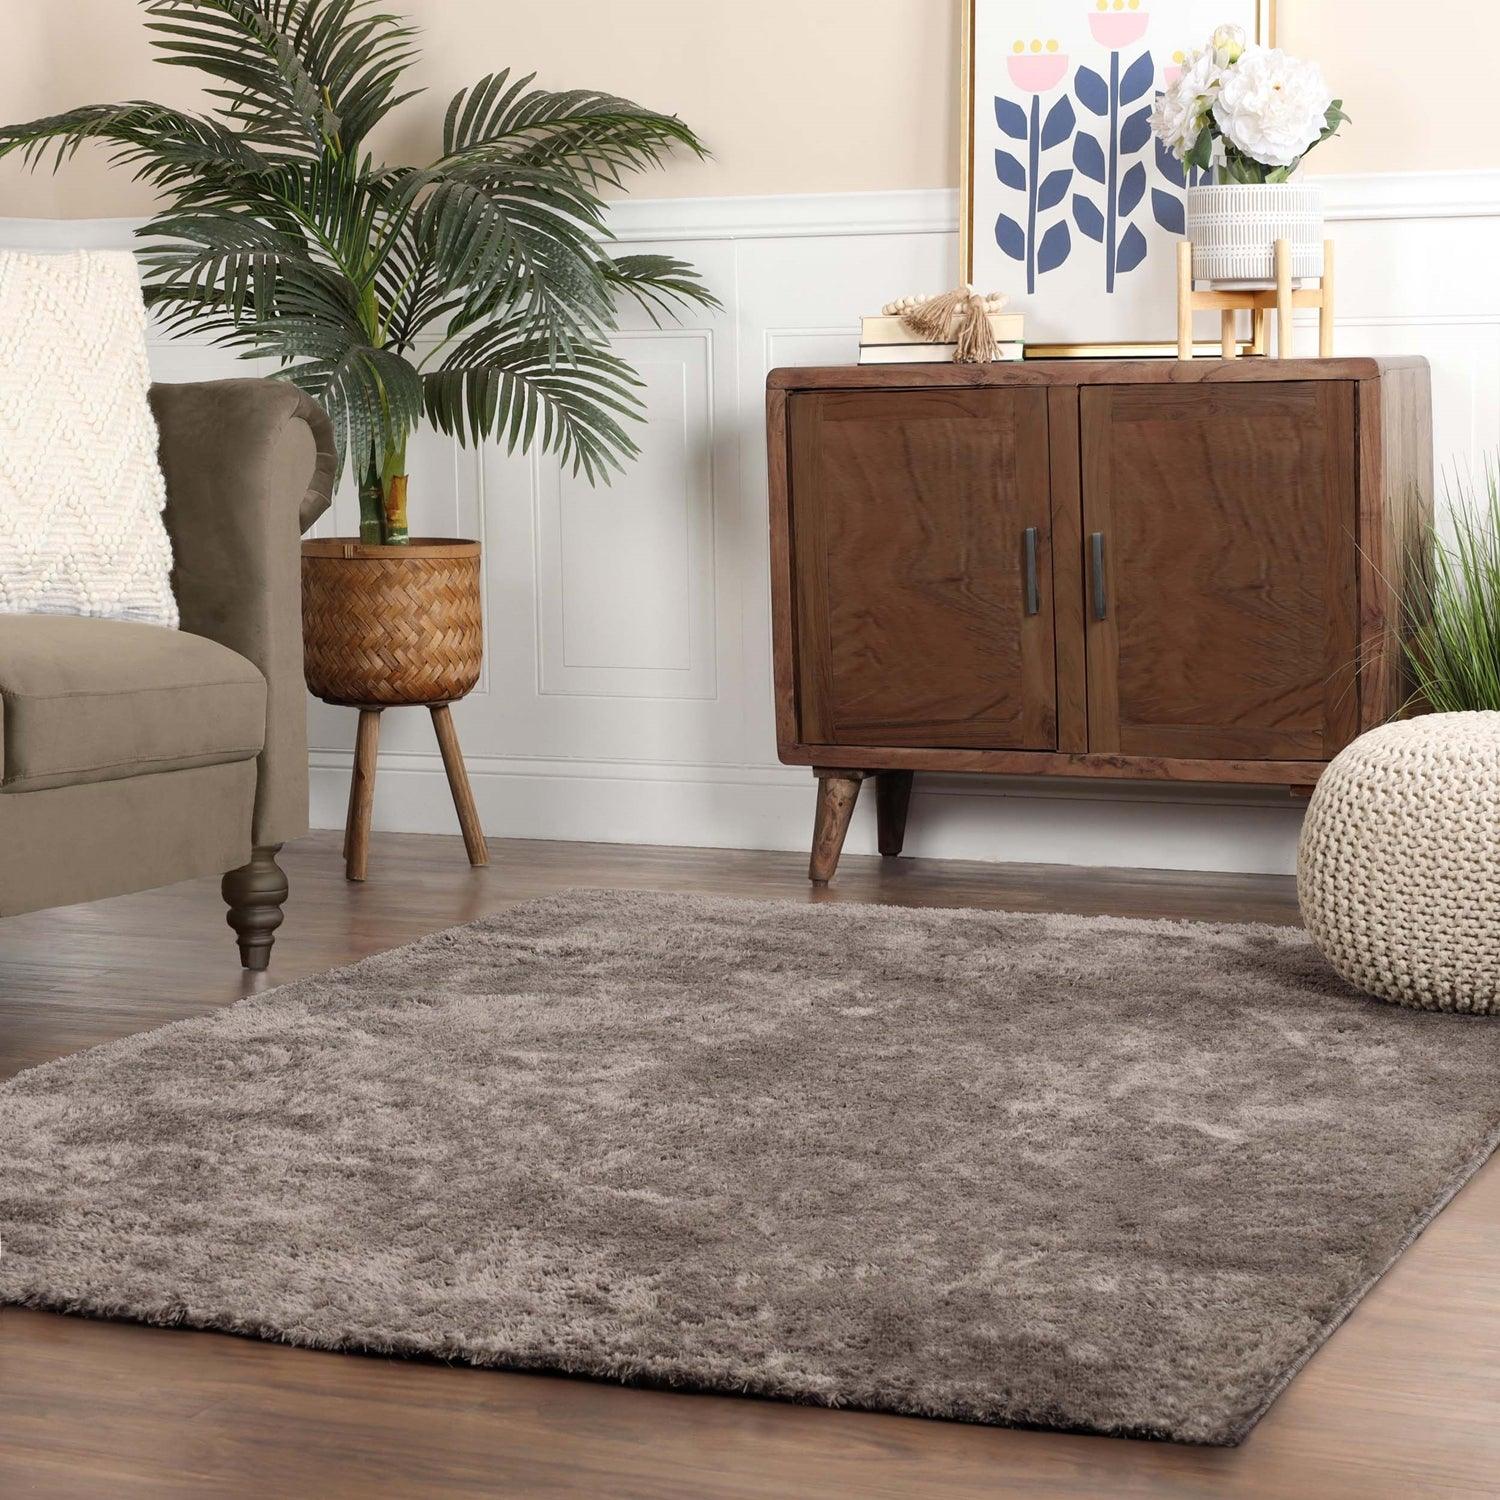 Superior Fuzzy Plush Non-Skid Soft Solid Shag Indoor Area Rug or Runner - Warm Stone